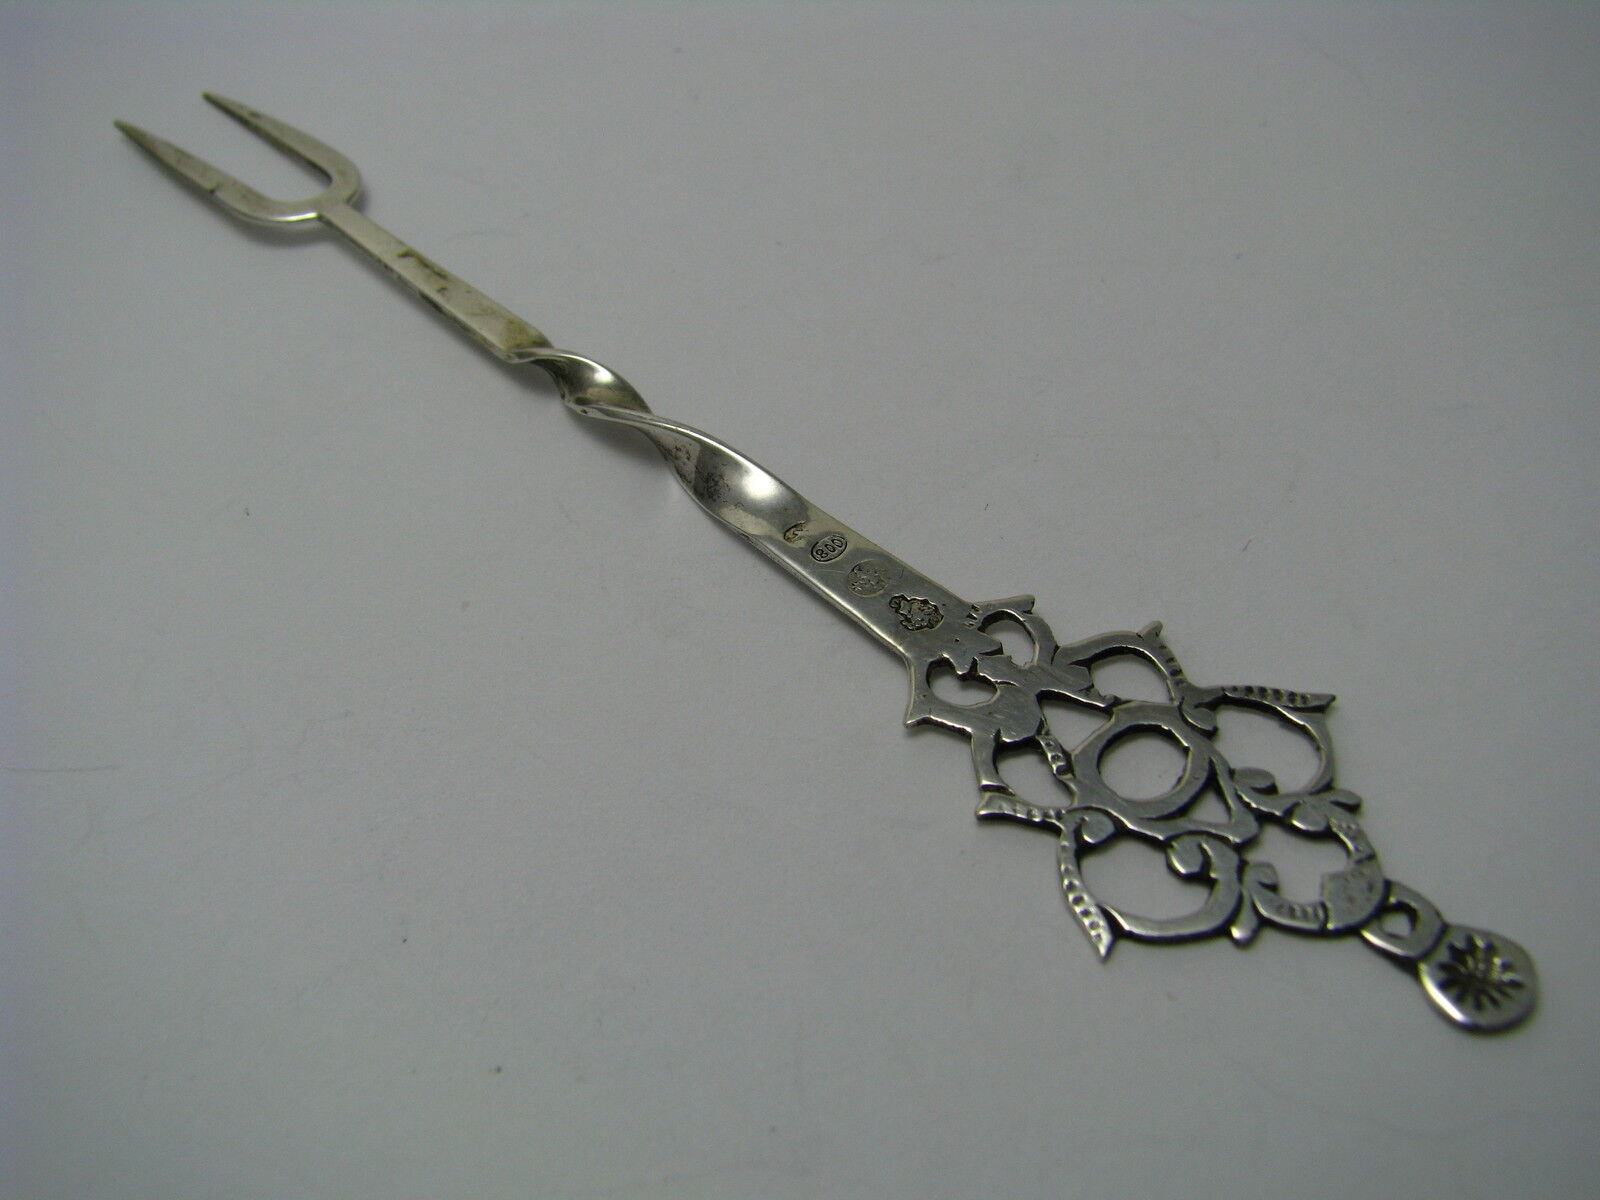 ITALIAN HANDMADE SOLID SILVER FORK SILVER OLIVE PICK FORK Italy ca1870s Rare